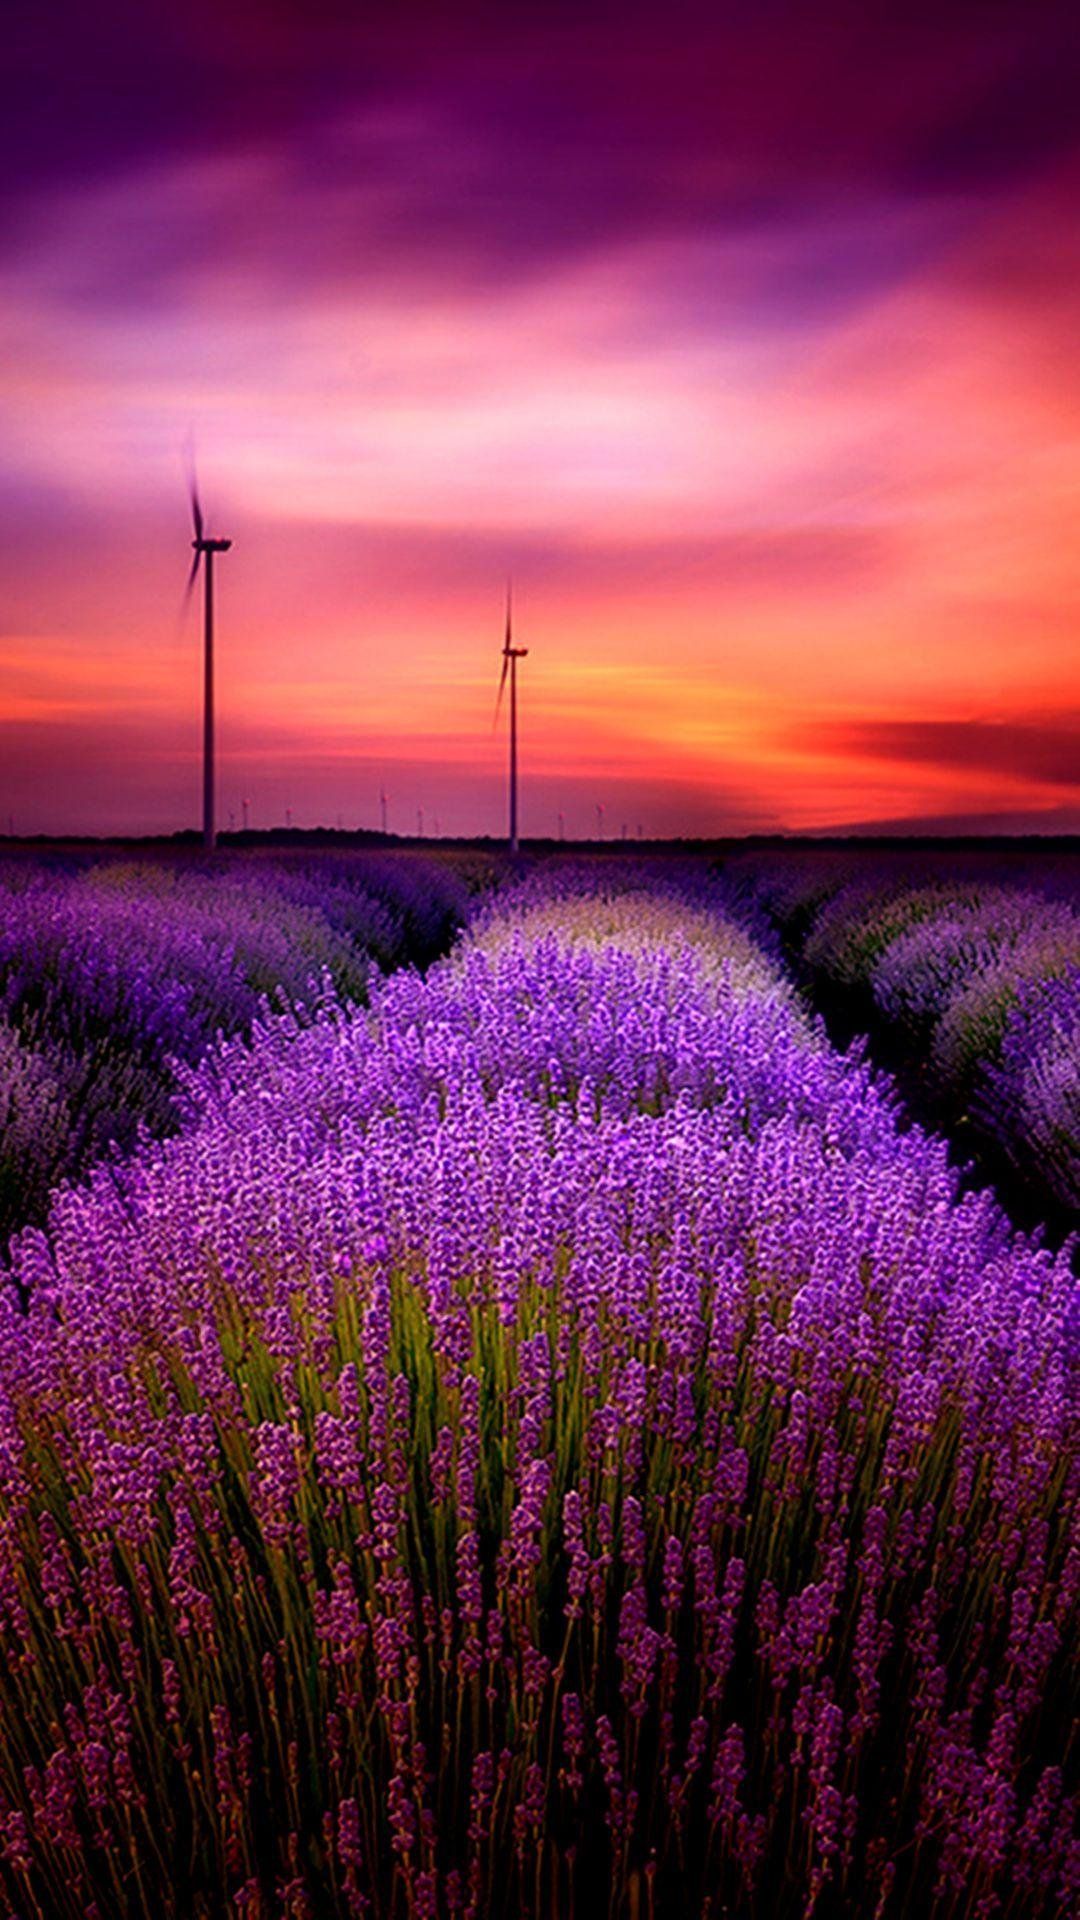 Lavender field with windmills in the background at sunset - Lavender, farm